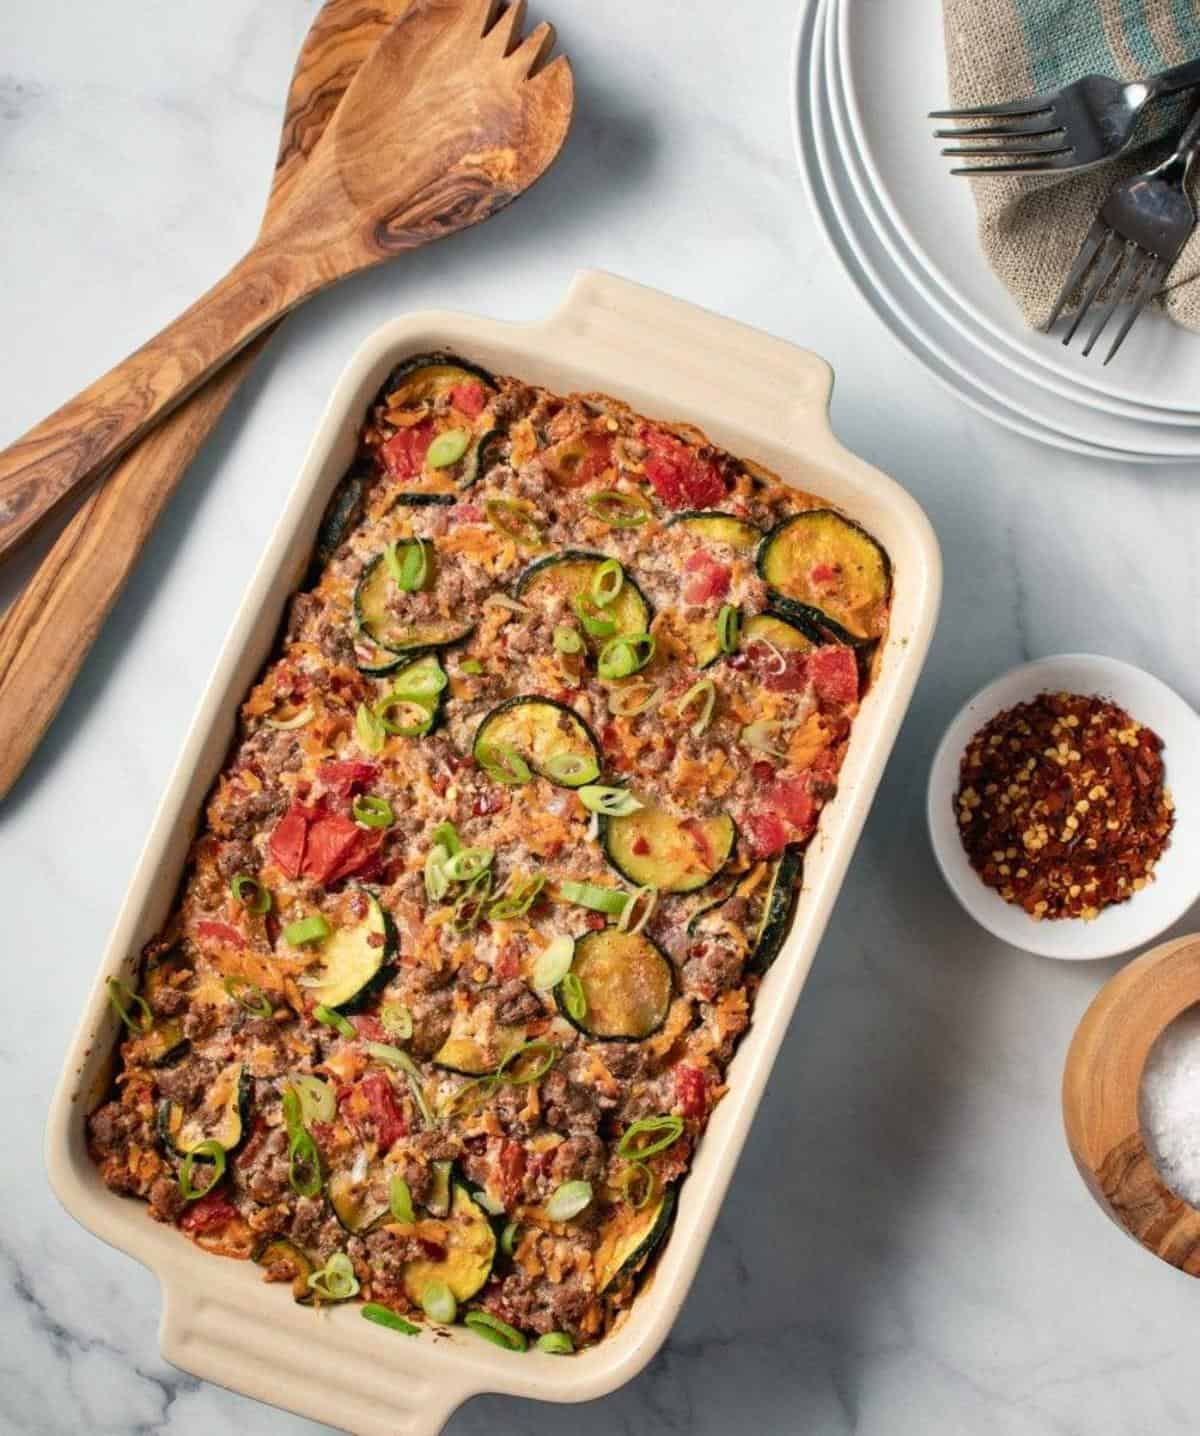 A  casserole dish with vegetables, ground beef, and spices.